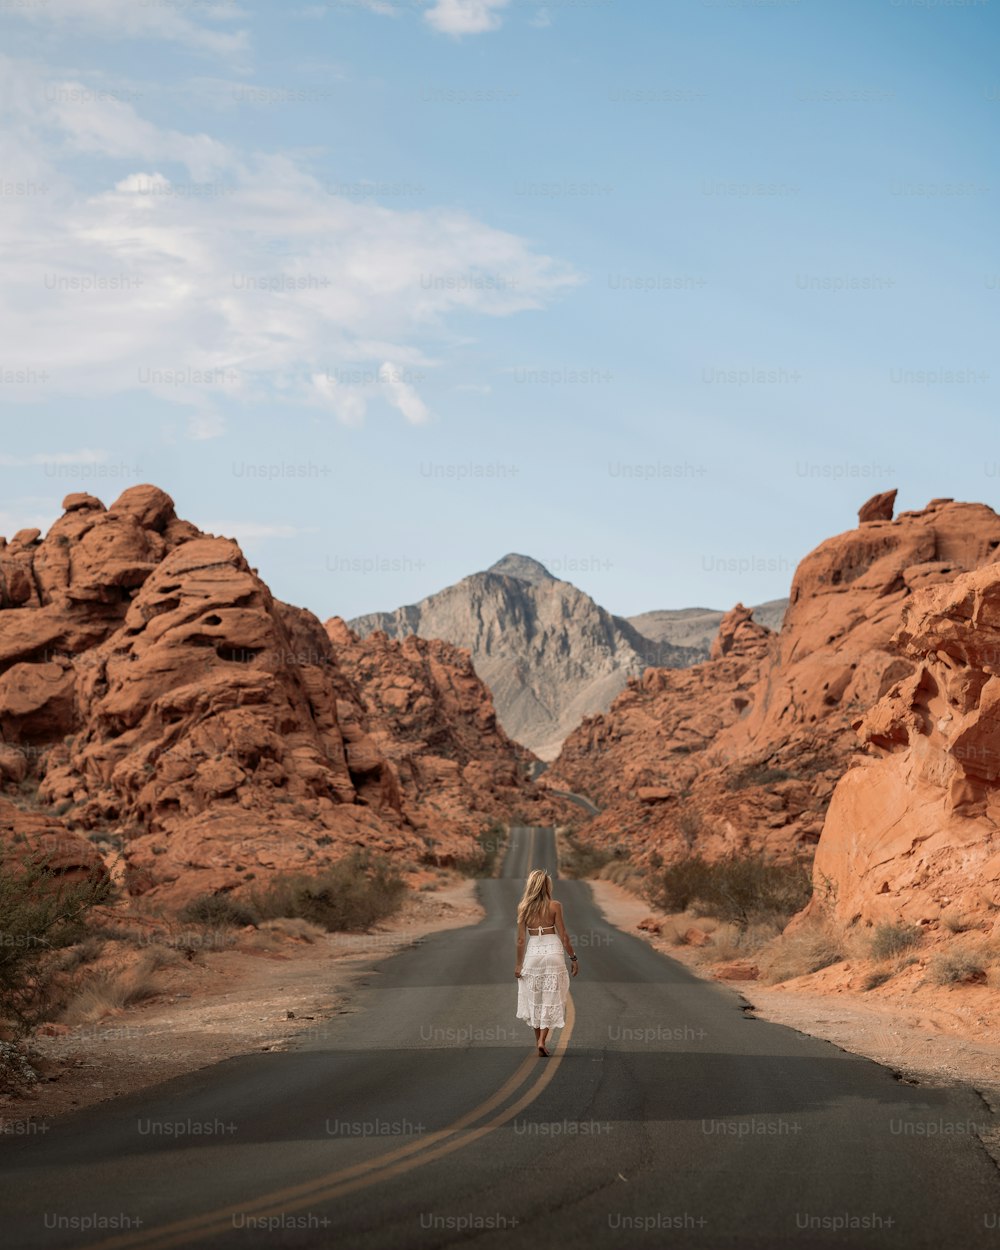 a person walking on a road in the desert